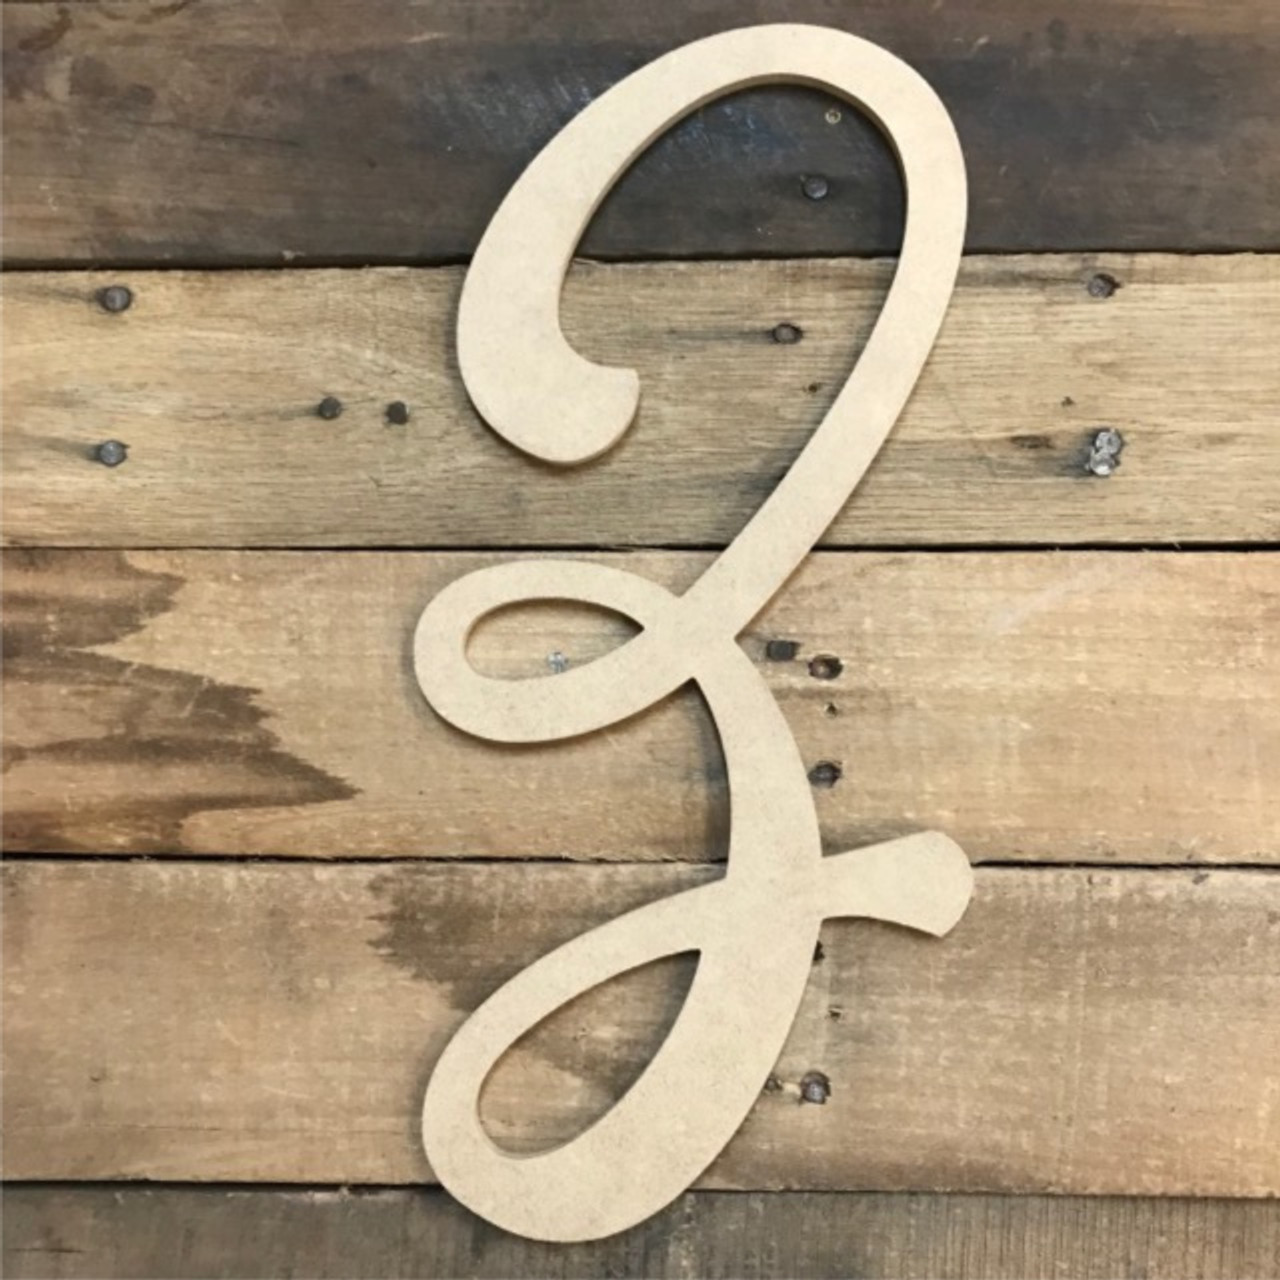 Unfinished Wooden Letter Large or Small, Unfinished, Cursive Wooden Letter  Perfect for Crafts, DIY, Weddings Sizes 1 to 42 